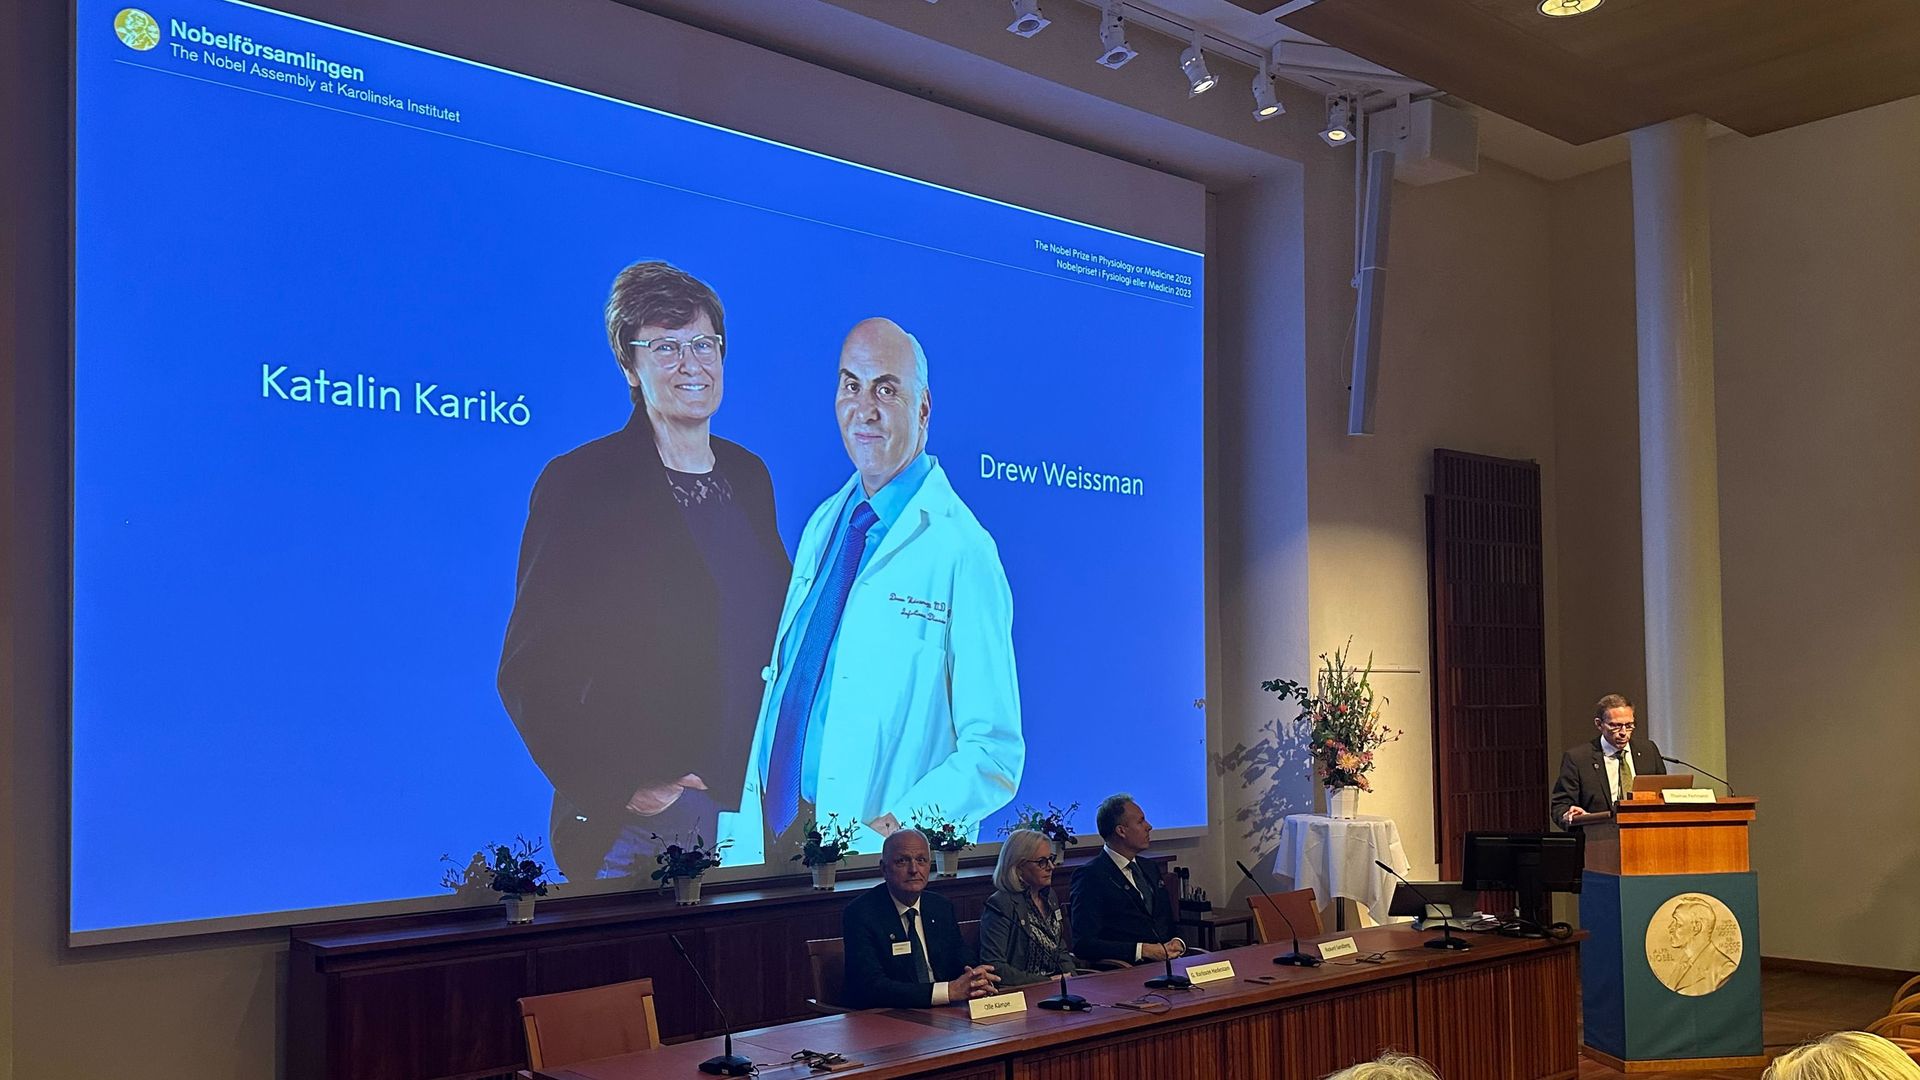 Photos of scientist Katalin Karikó and scientist Drew Weissman are shown on a screen during the announcement of the Nobel Prize in Medicine today in Stockholm.